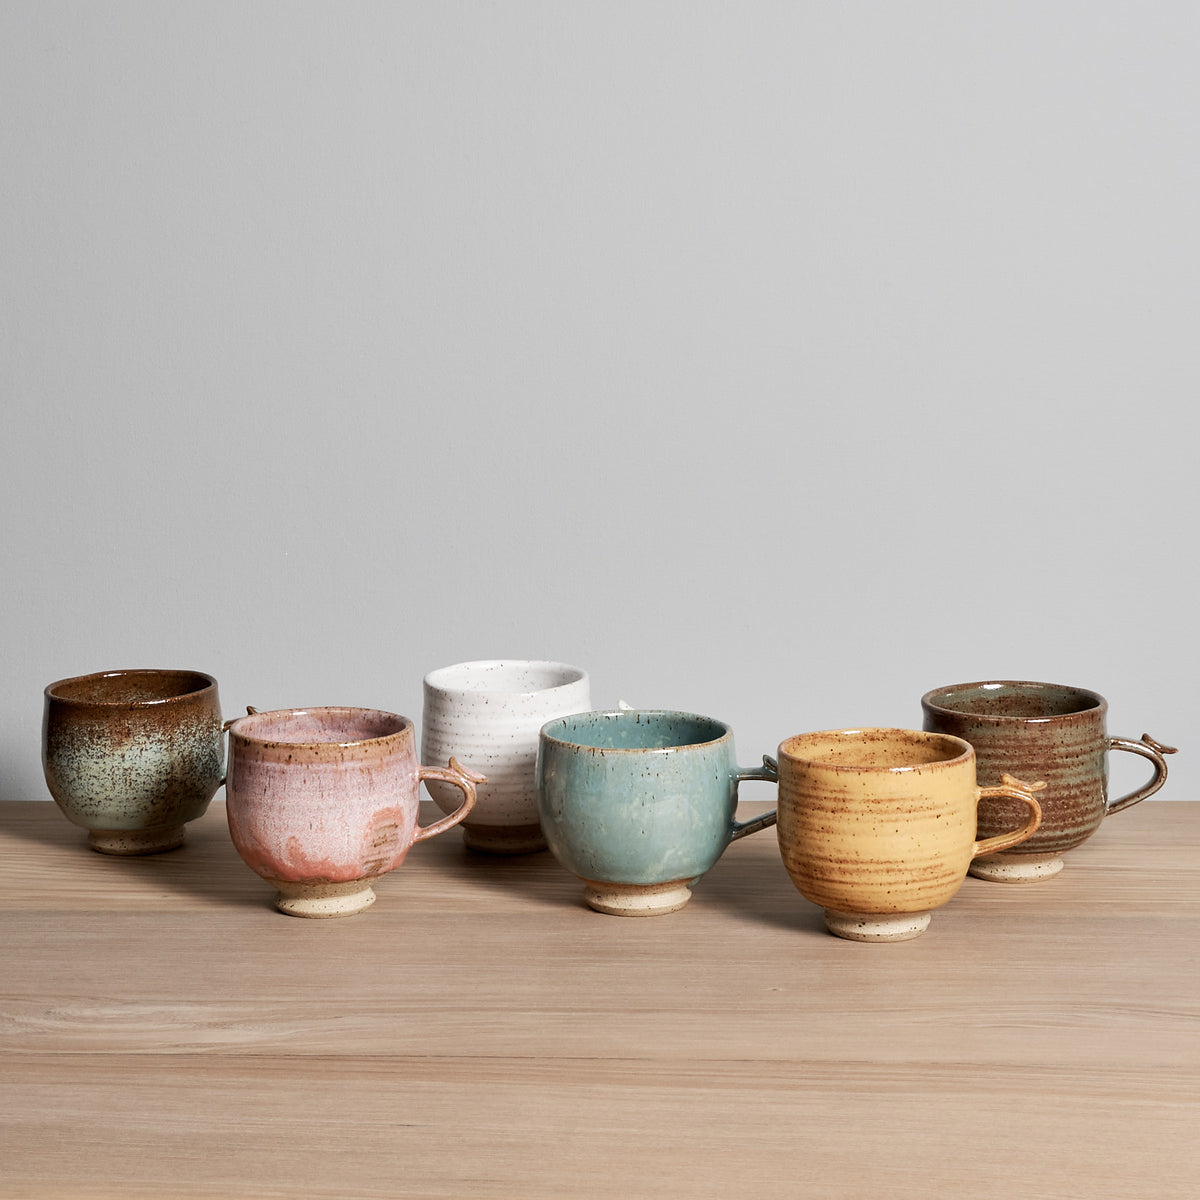 Five different colored Bird Handle Cups - Rhubarb are lined up on a wooden table, made by Jino Ceramic Studio.